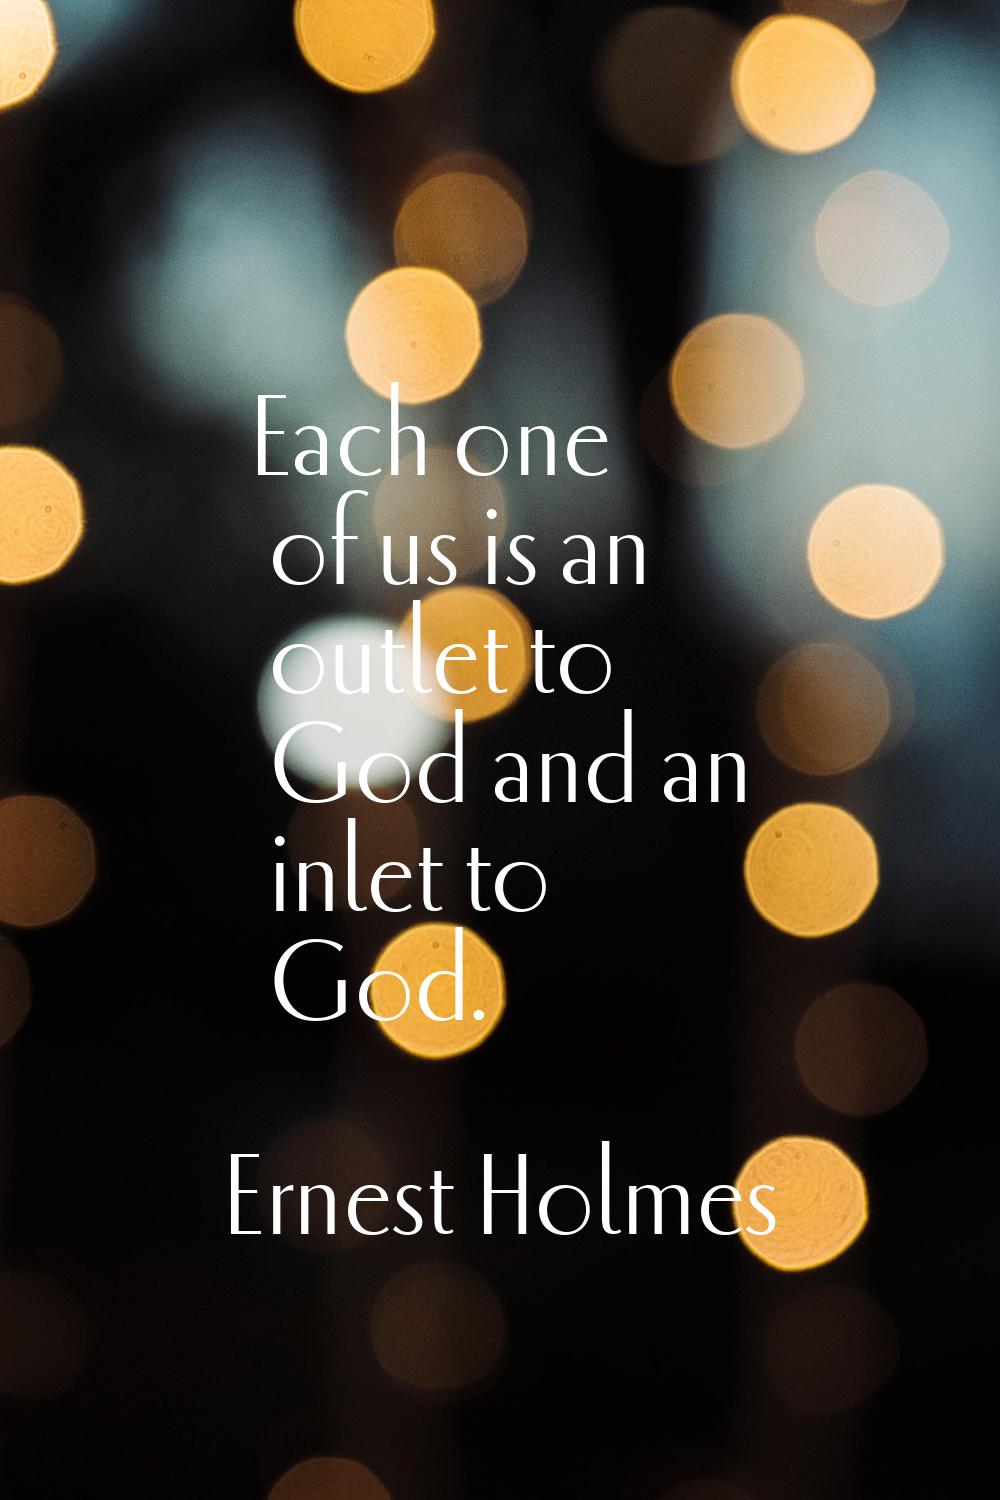 Each one of us is an outlet to God and an inlet to God.